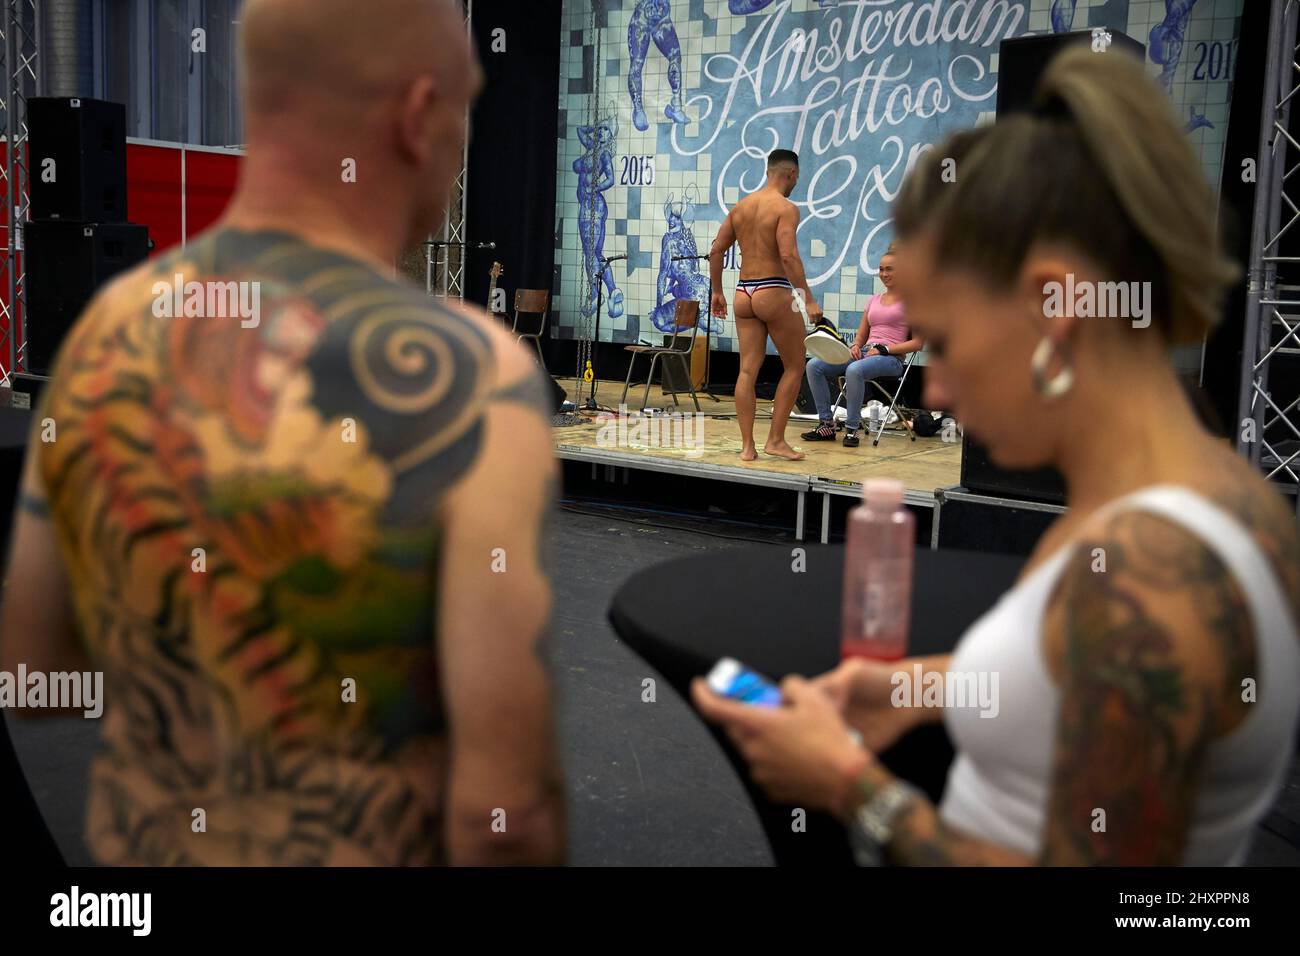 Participants of the tattoo convention attend a striptease show Stock Photo